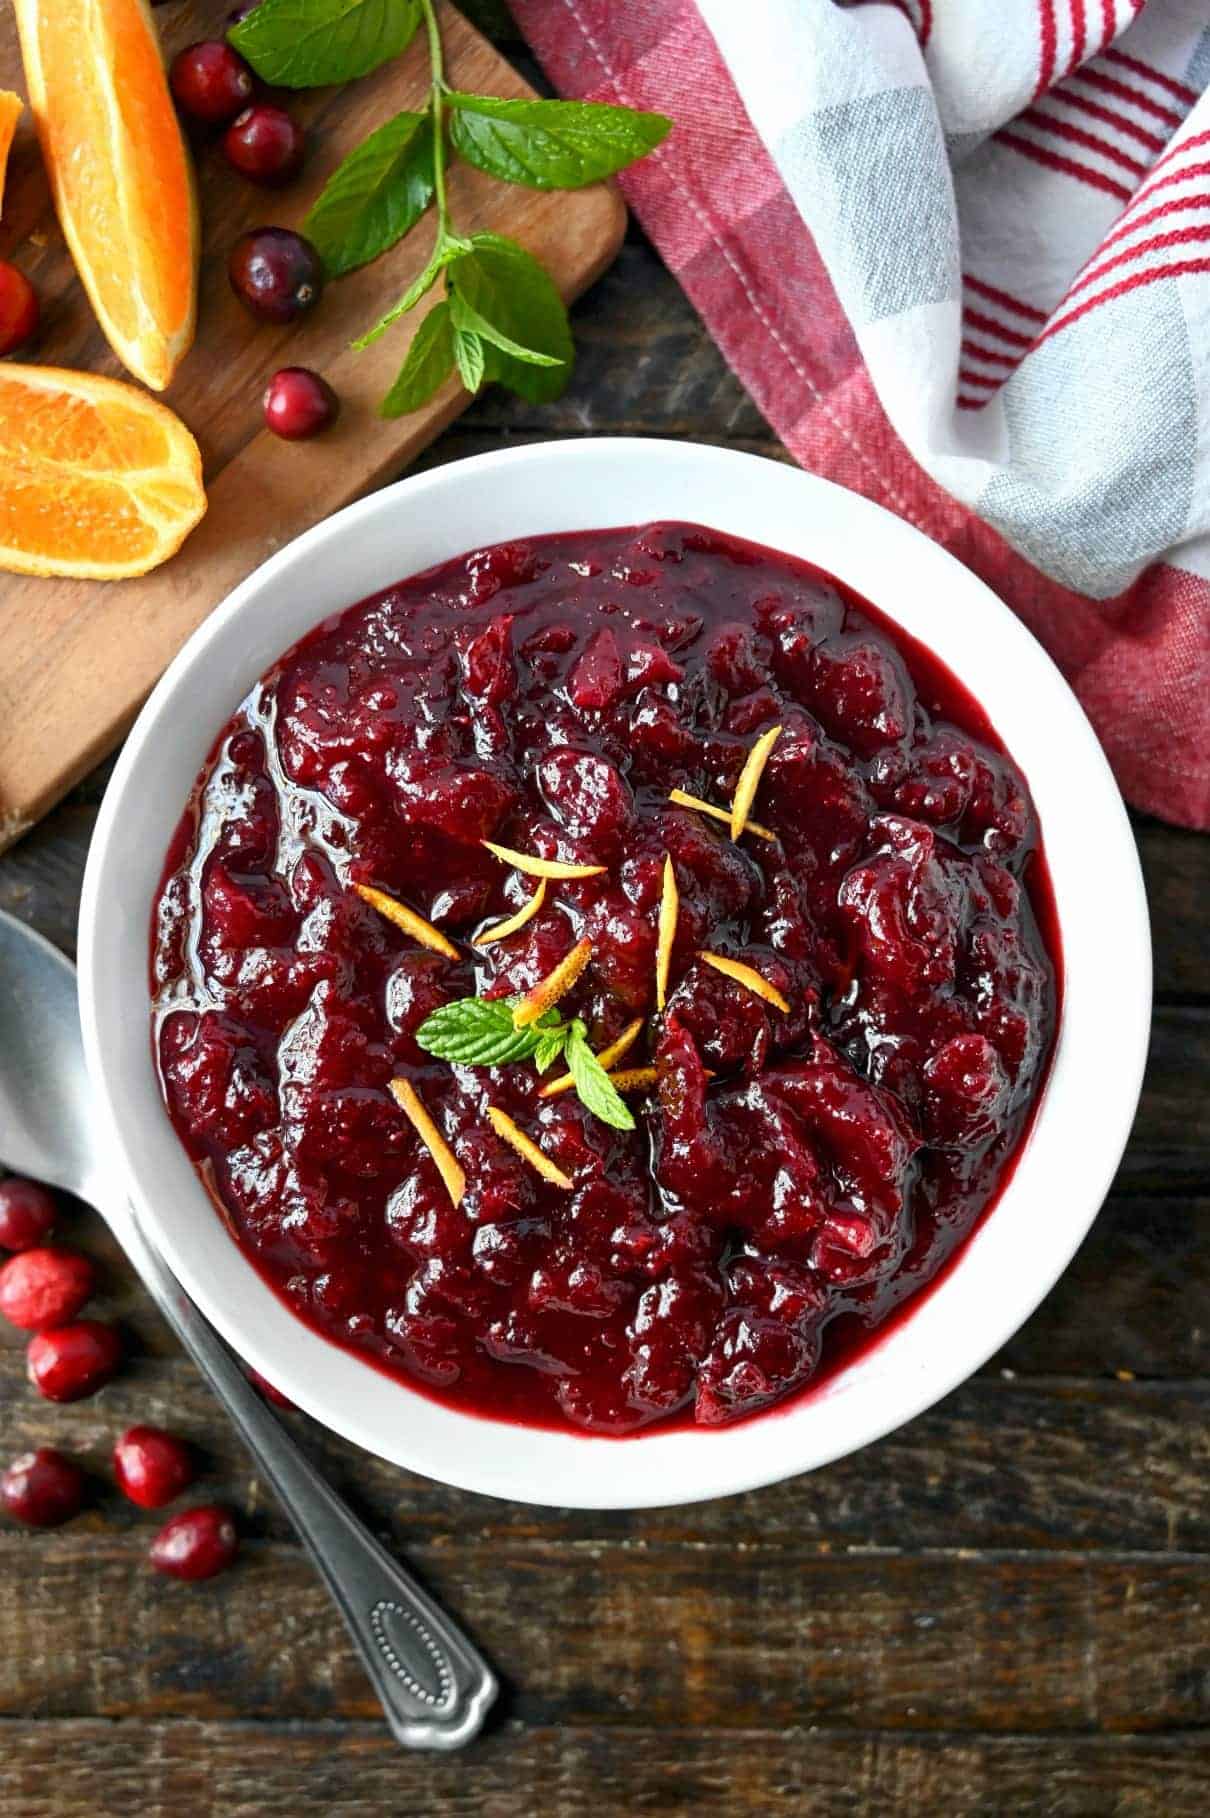 Homemade cranberry sauce in a white bowl with orange peel shavings on top and a sprig of mint.